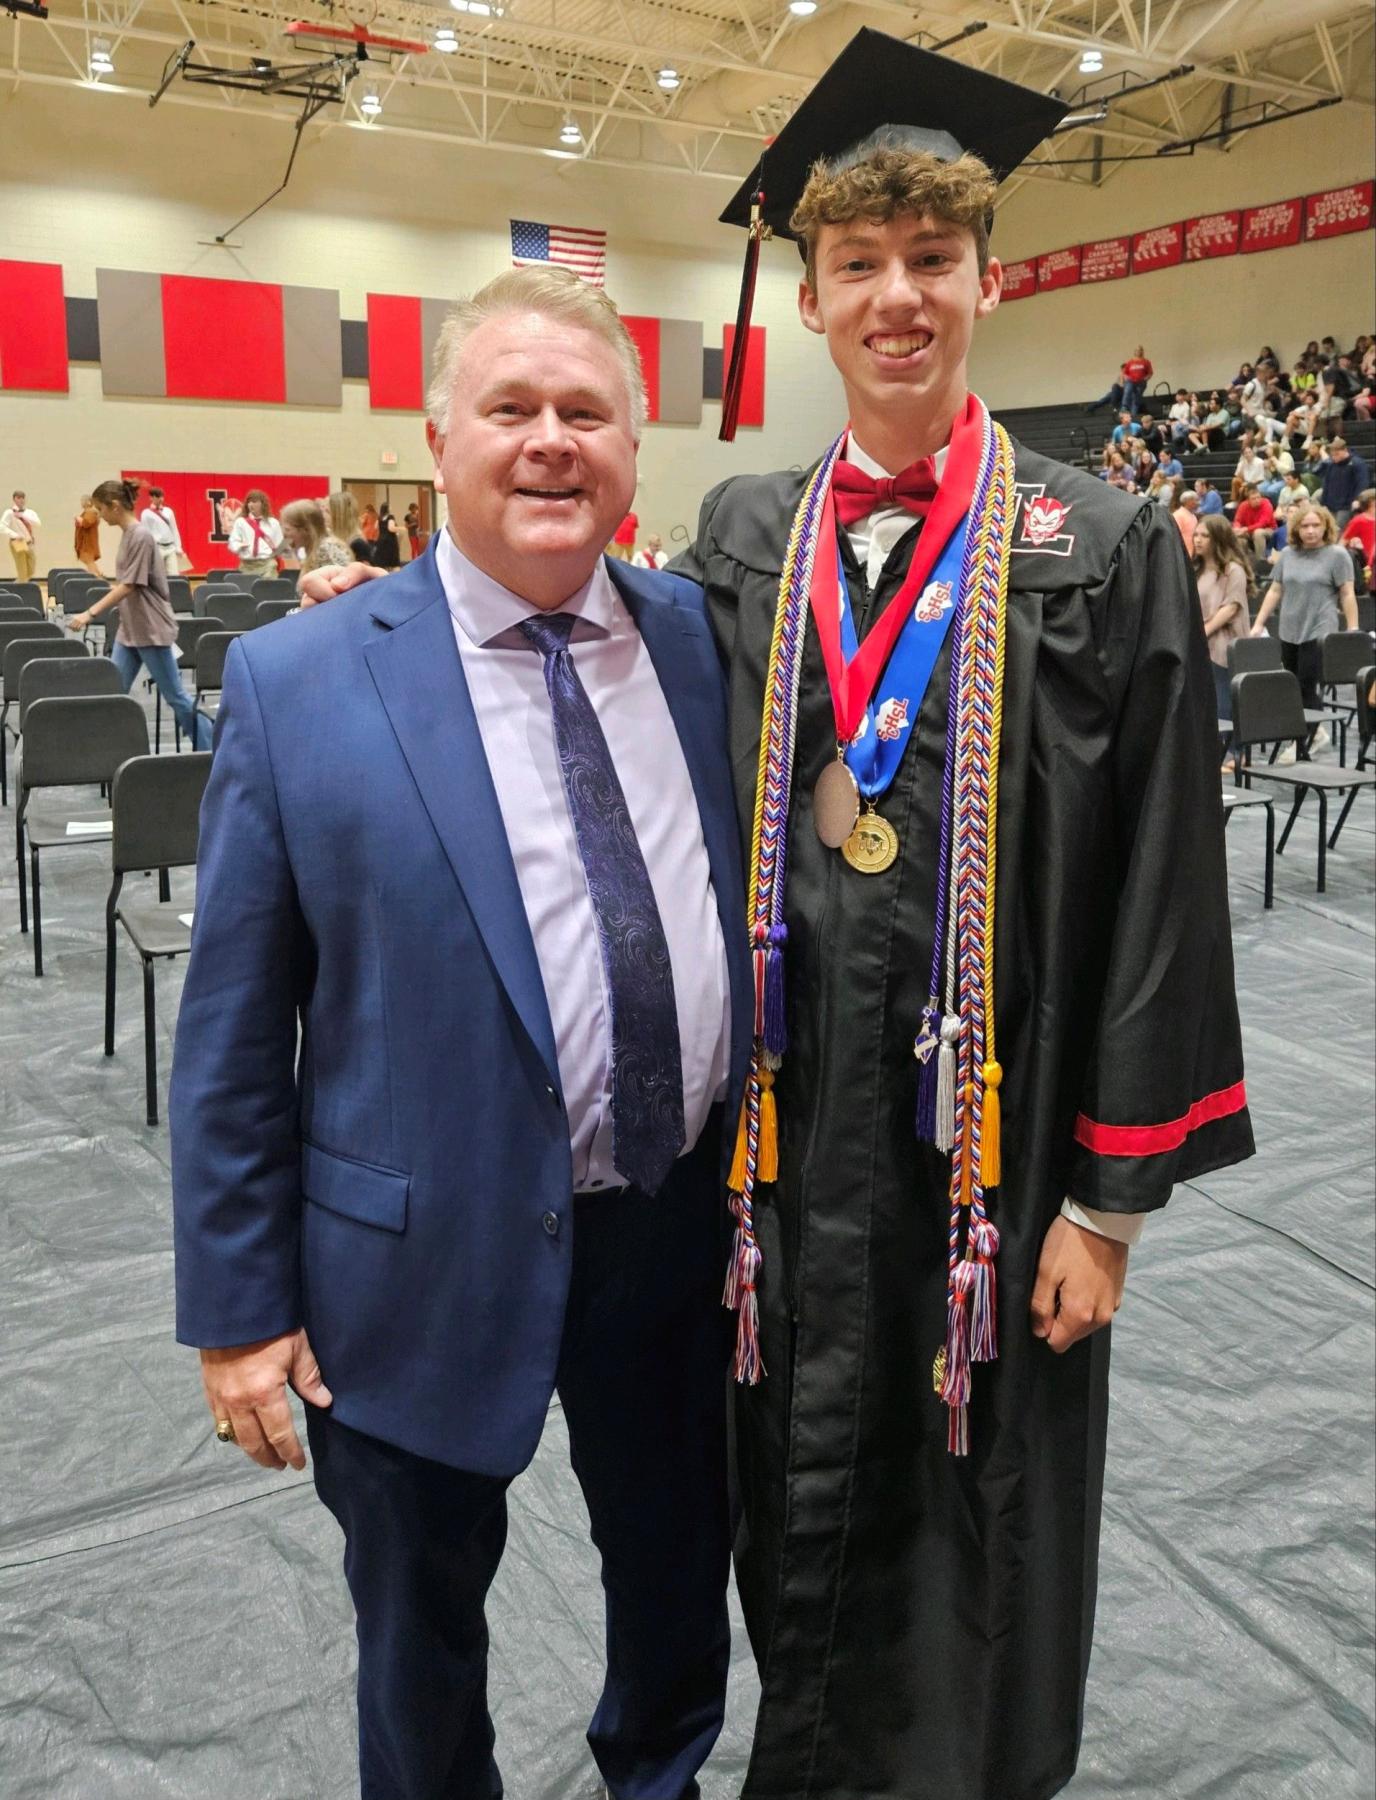 Roy Costner (left) dressed in business attire stands beside scholarship winner Isaac Esuary, who wears a graduation cap and gown. Both smile into the camera. A high school gym is in the background.